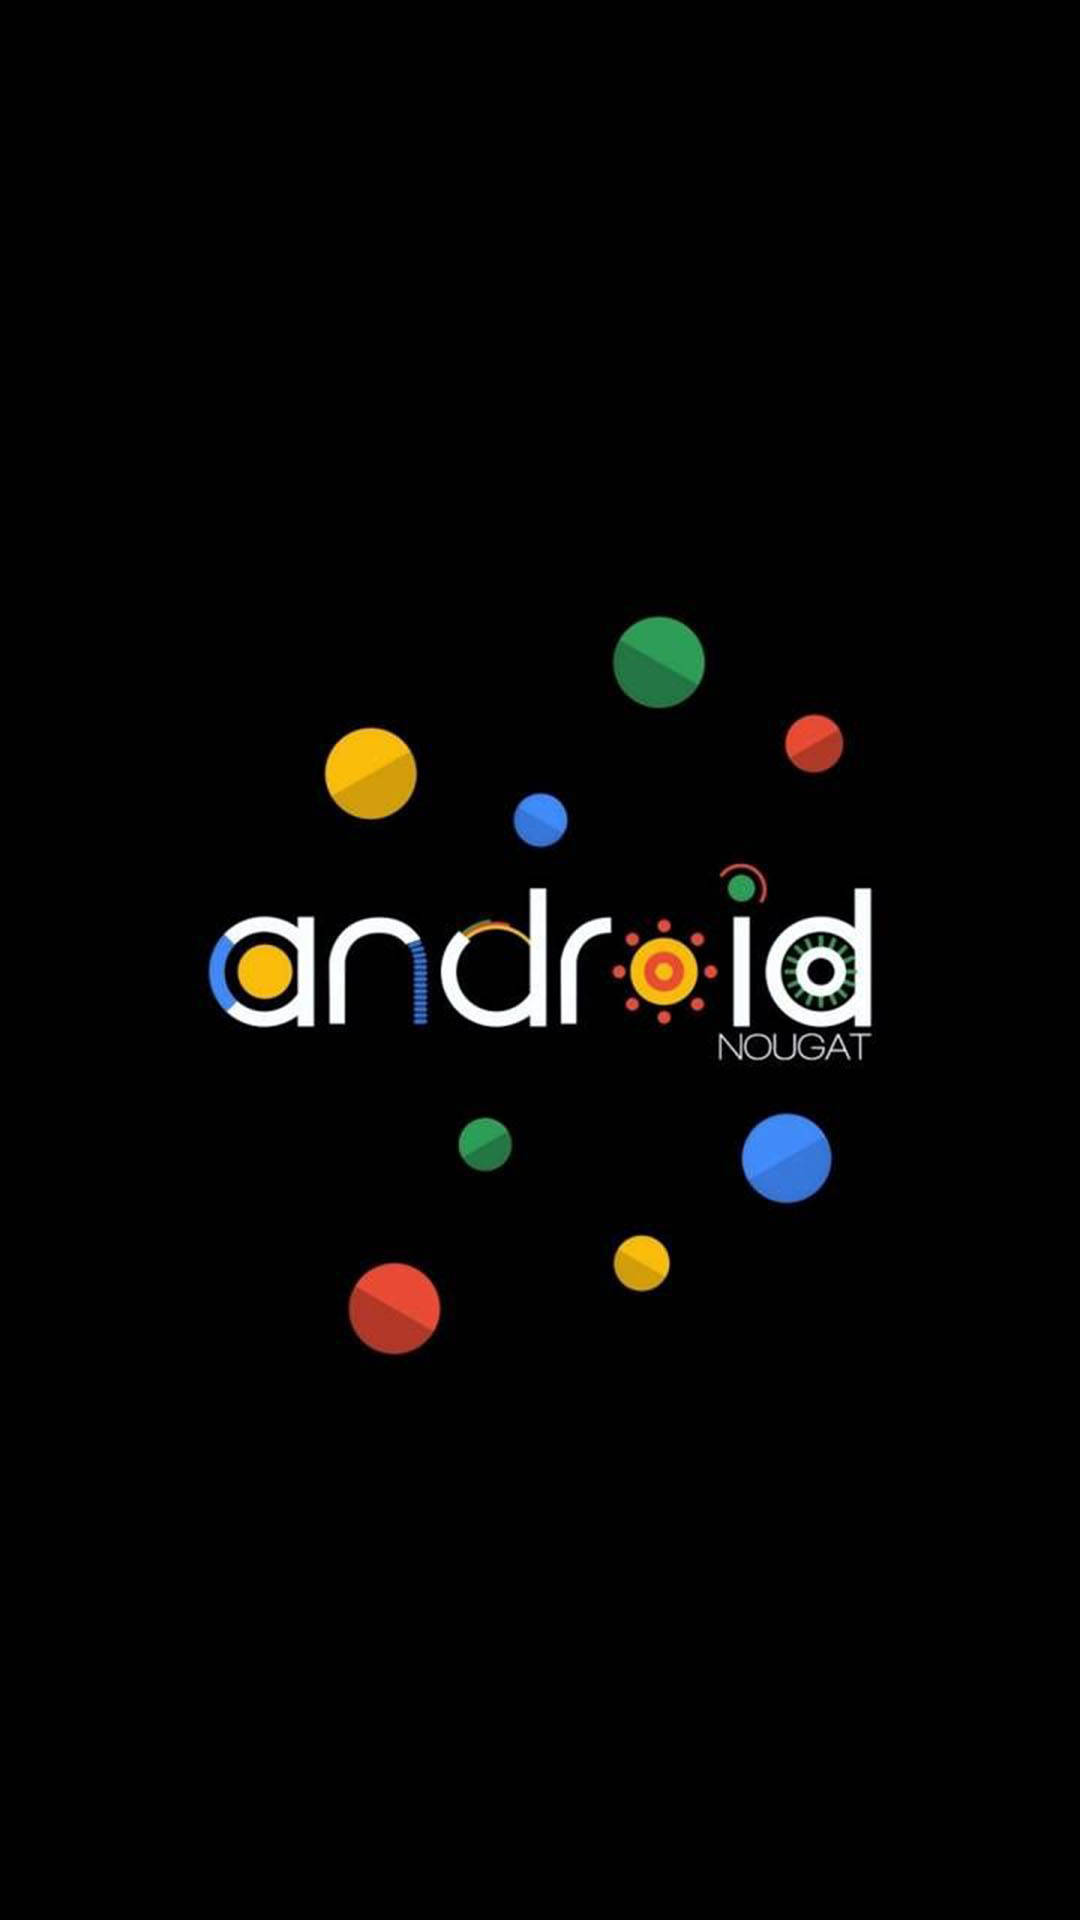 Free Dark Android Wallpaper Downloads, [100+] Dark Android Wallpapers for  FREE 